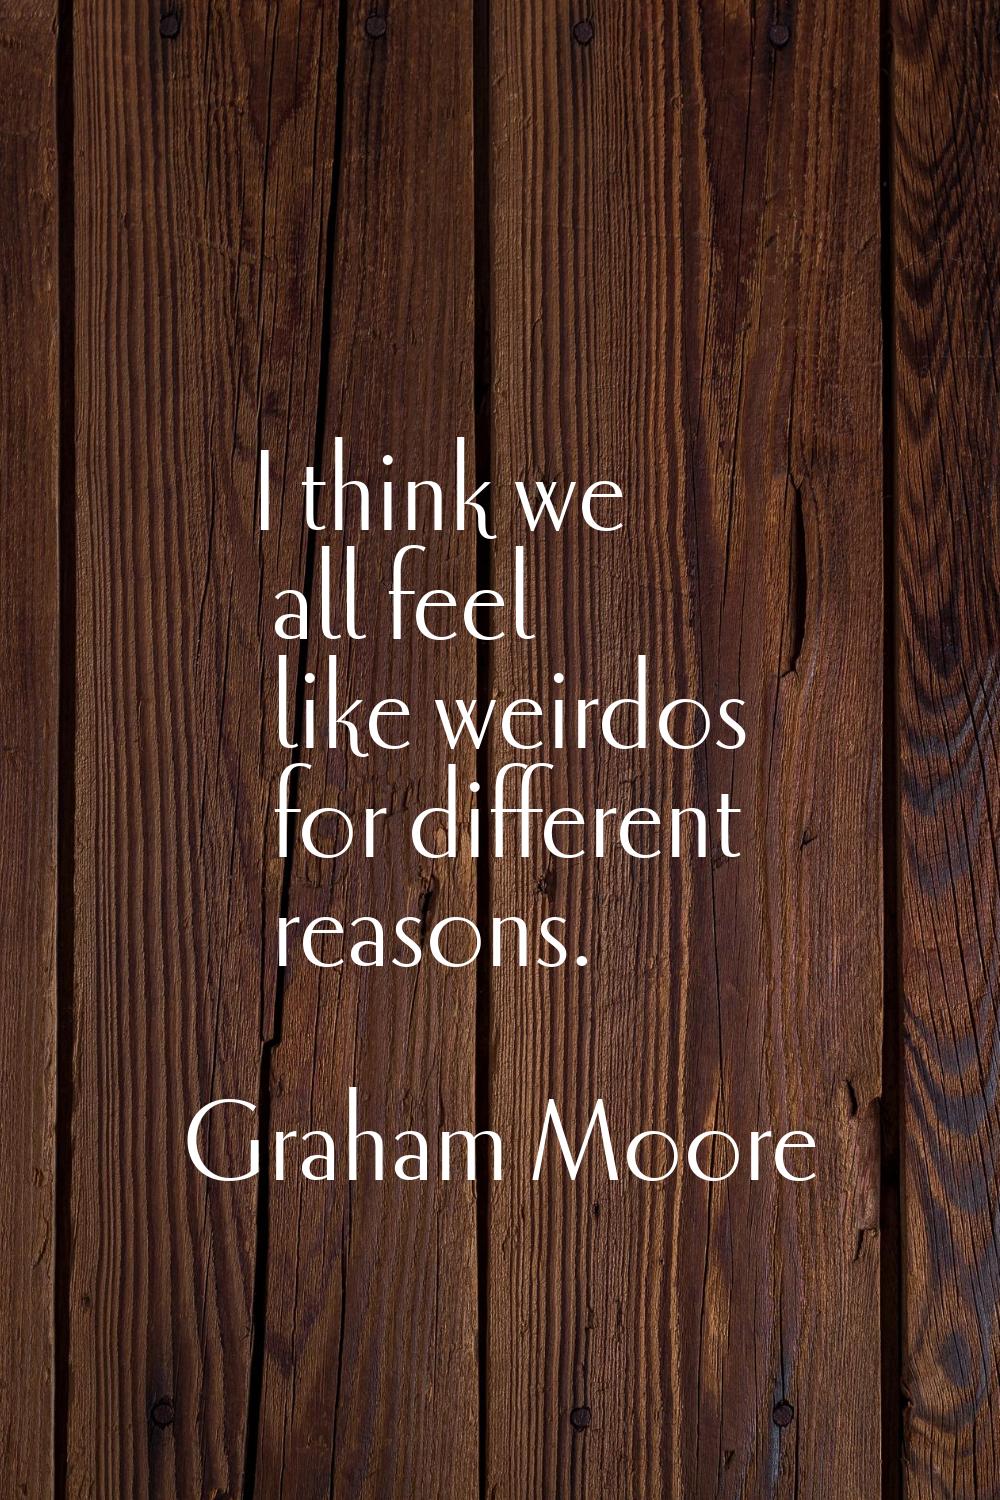 I think we all feel like weirdos for different reasons.